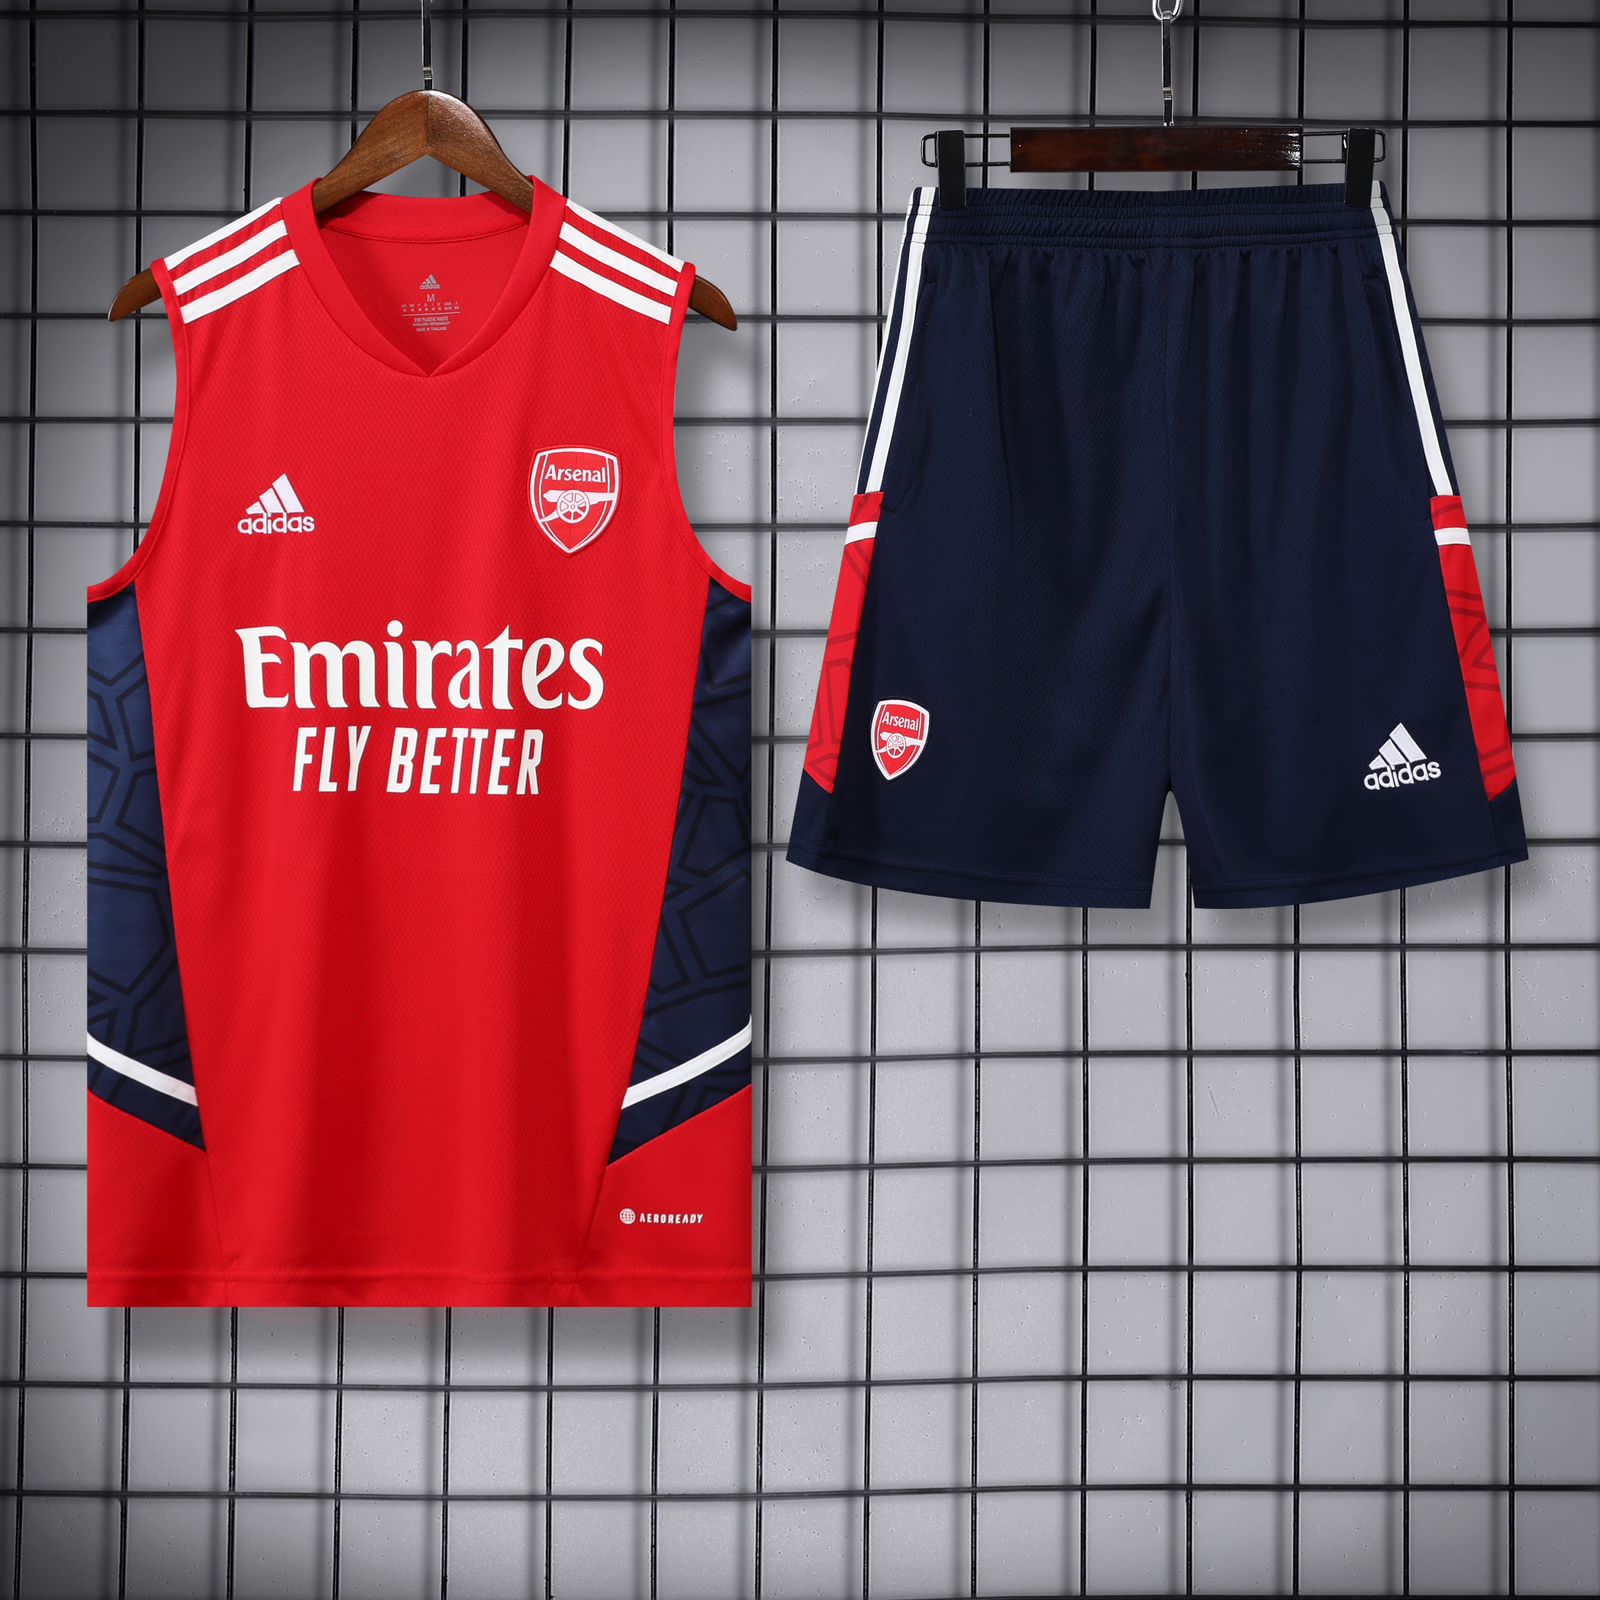 Arsenal Red Sleeveless Jersey With Shorts